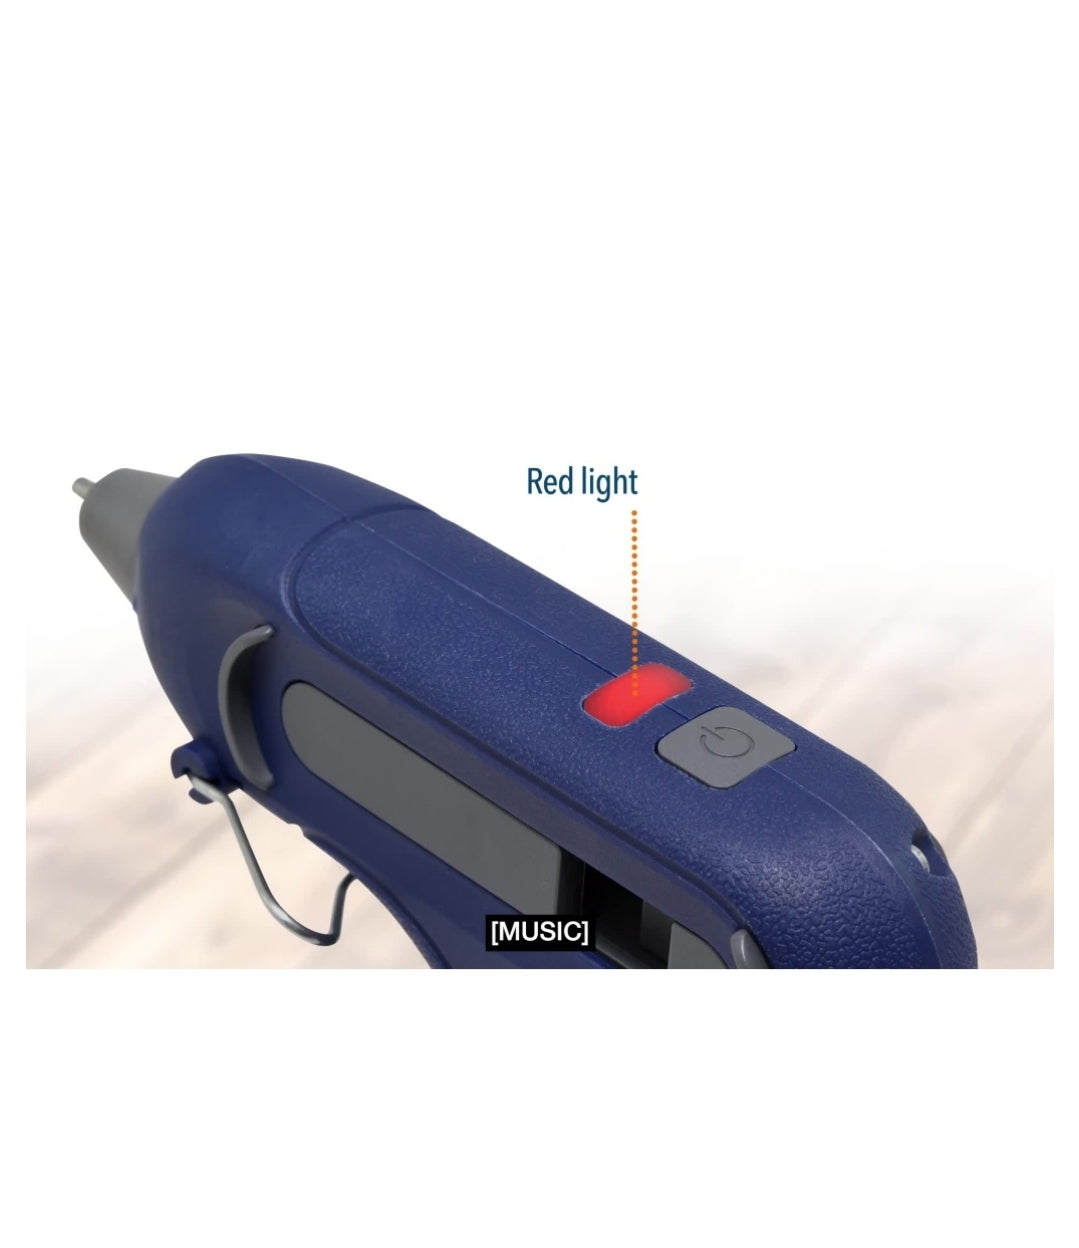 Westcott ProjectMate Lithium Ion Cordless Rechargeable Hot Glue